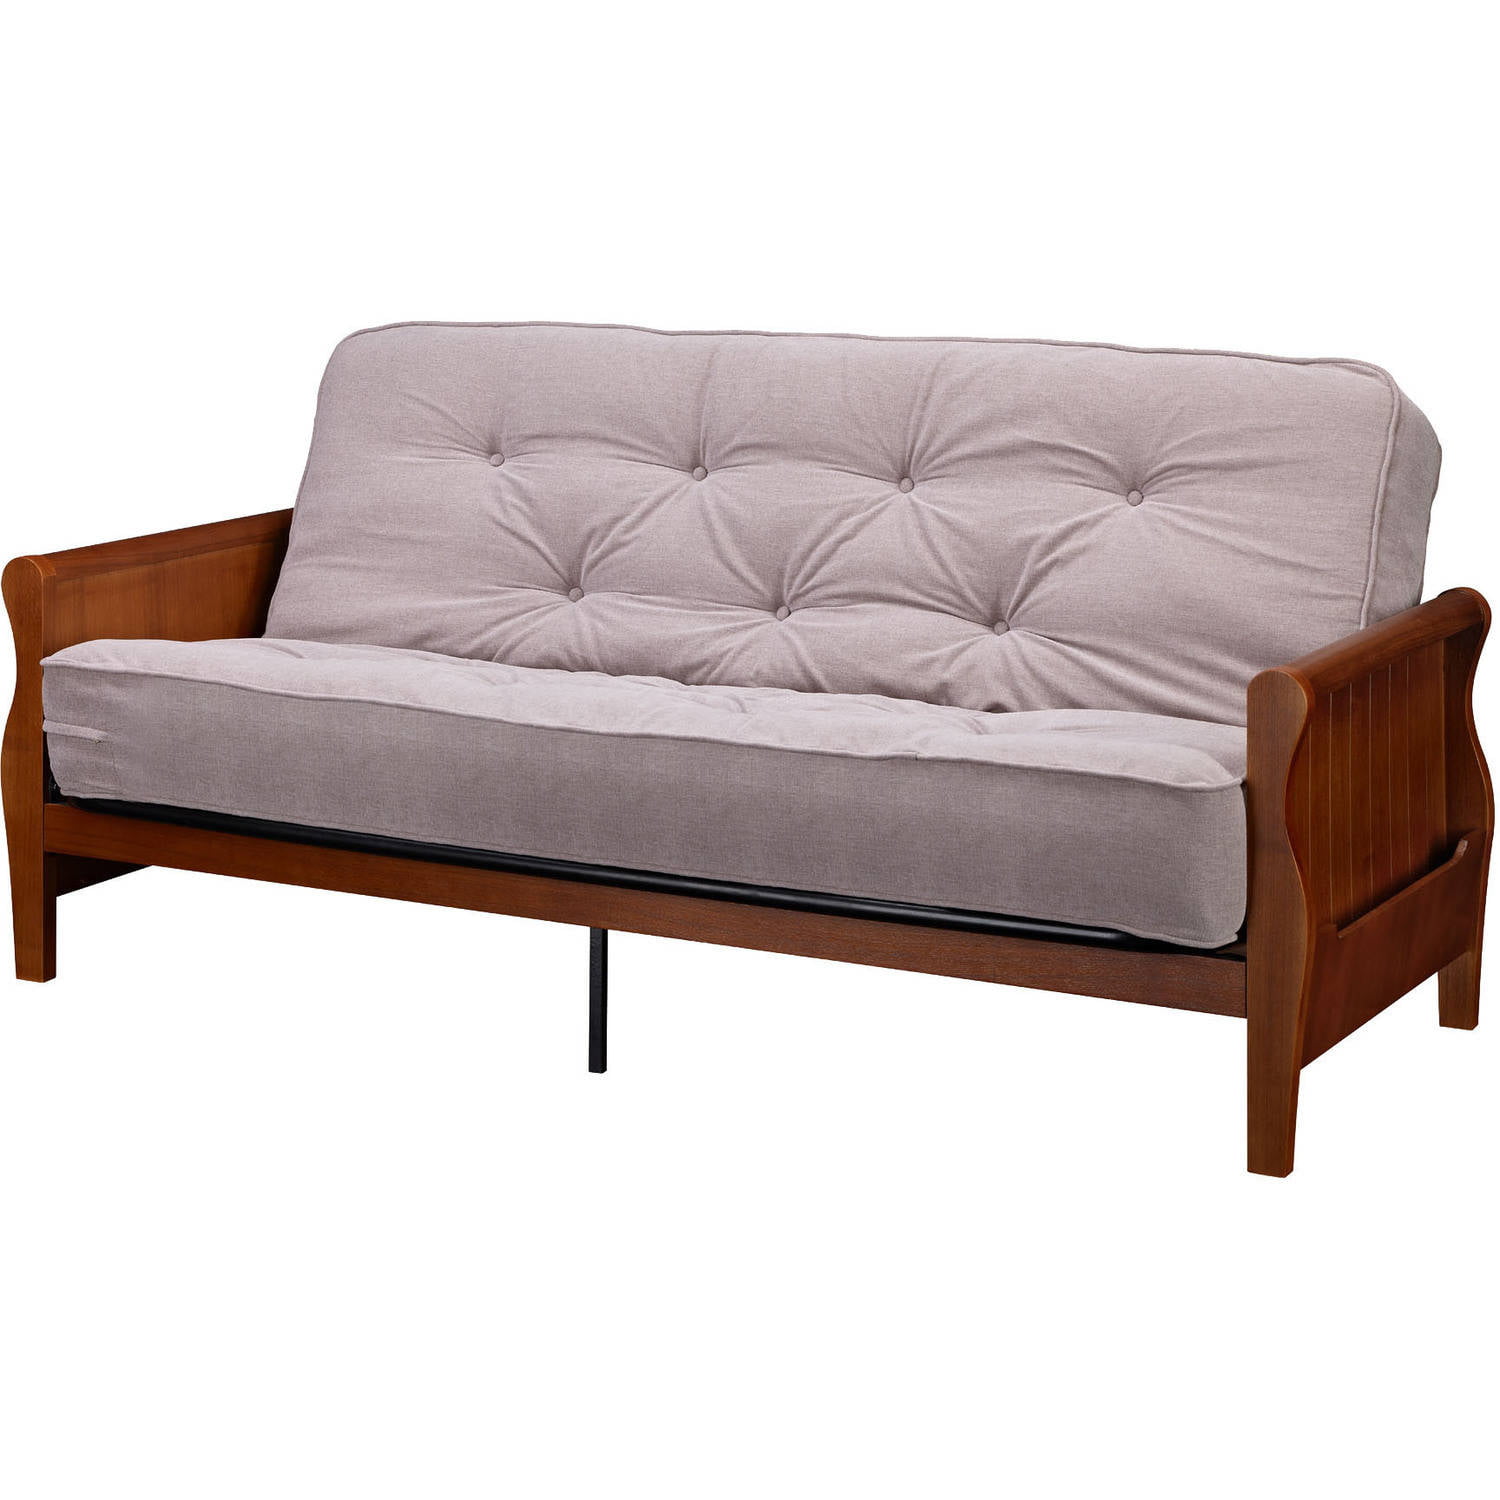 Better Homes and Gardens Wood Arm Futon With 8" Coil Mattress